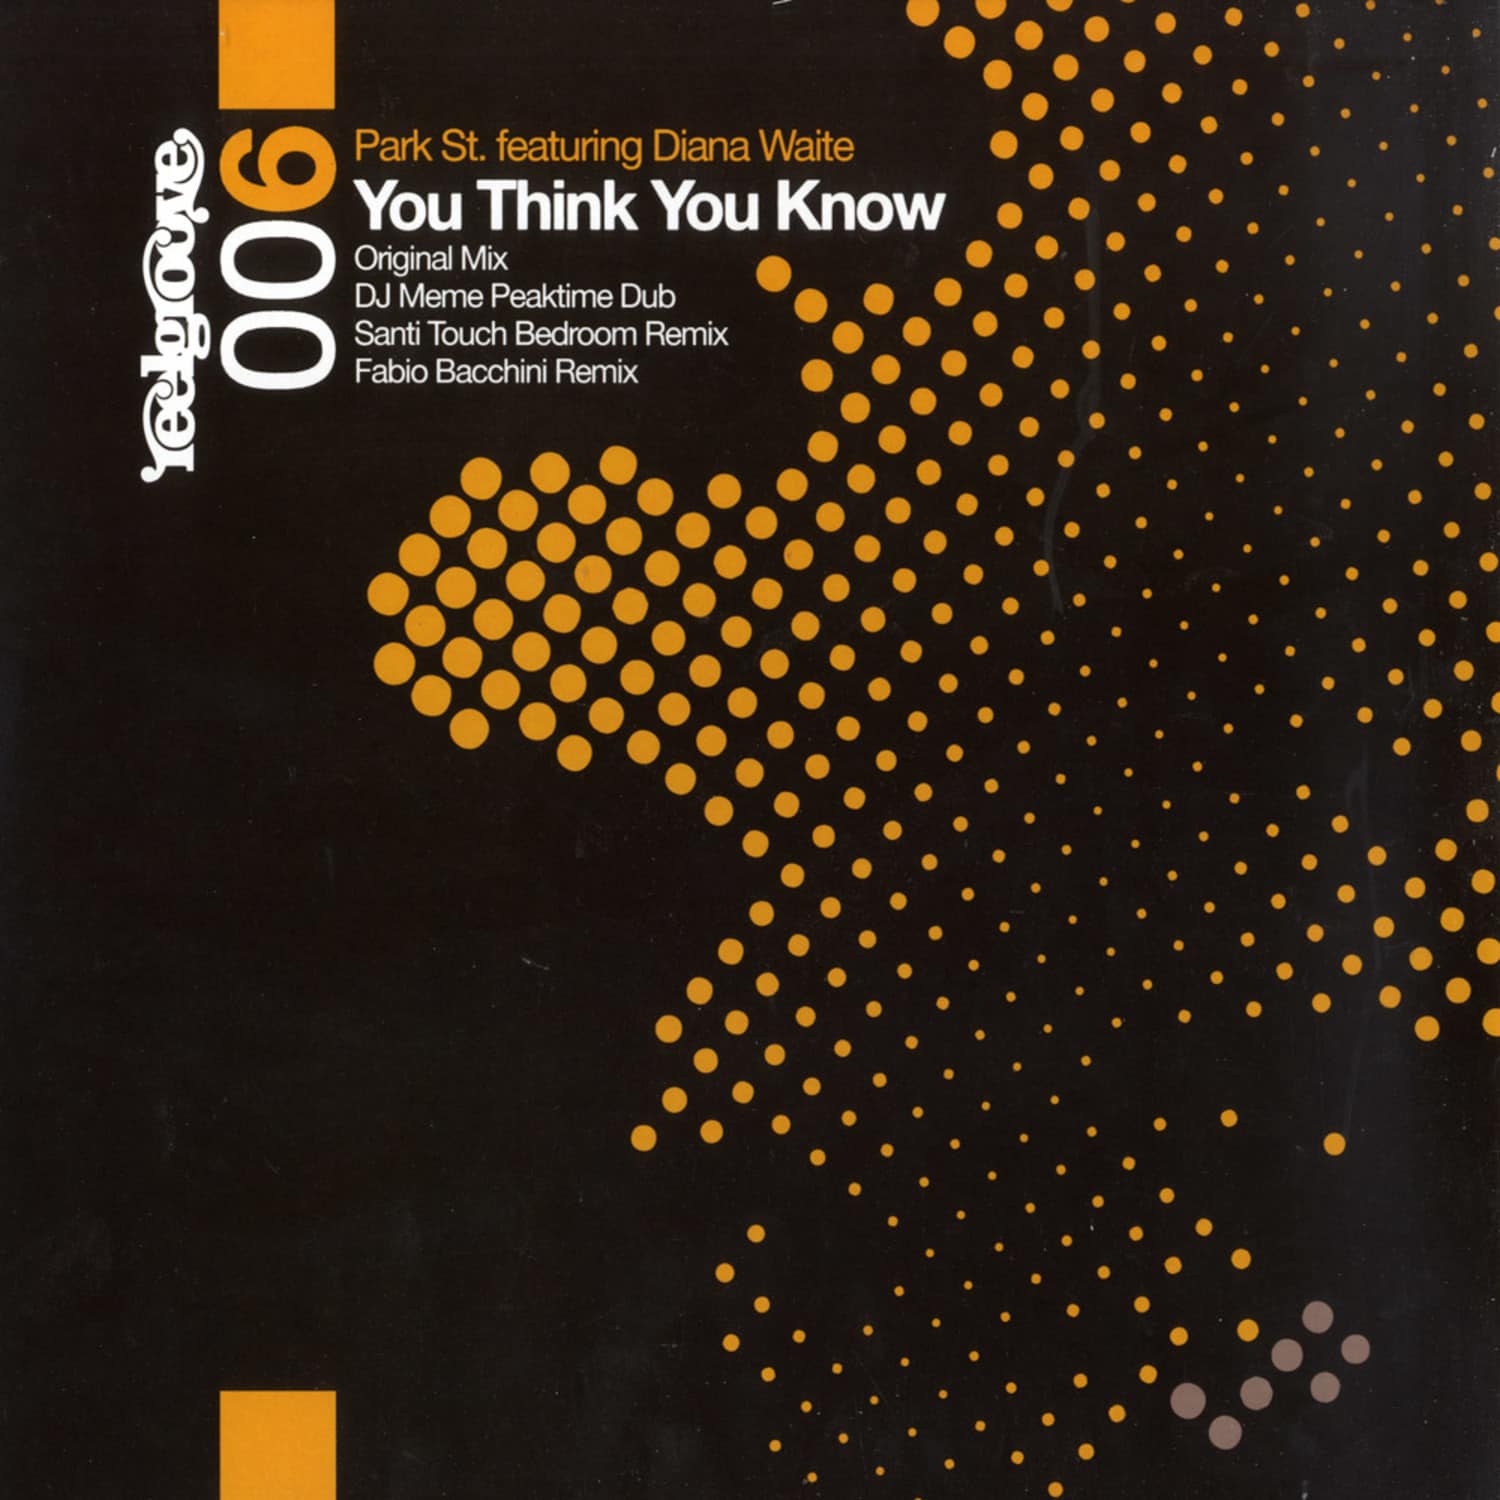 Park St feat Diana Waite - YOU THINK YOU KNOW